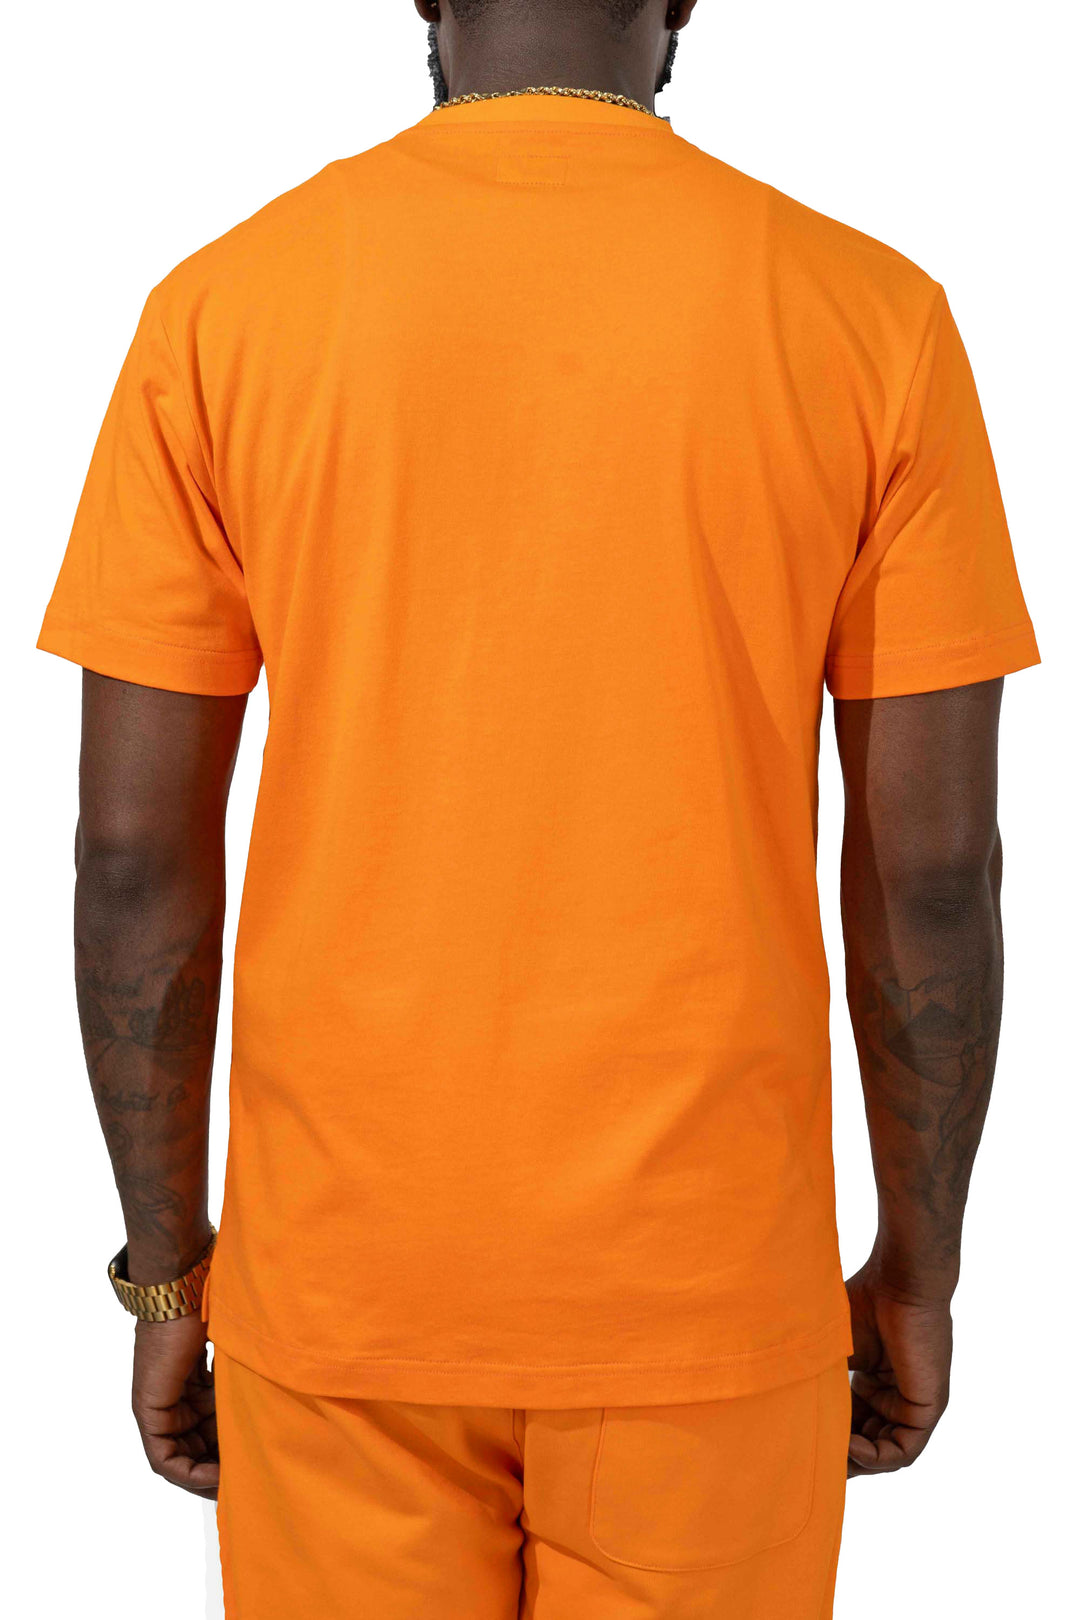 Live With Purpose Essential Orange Embroidered Shirt